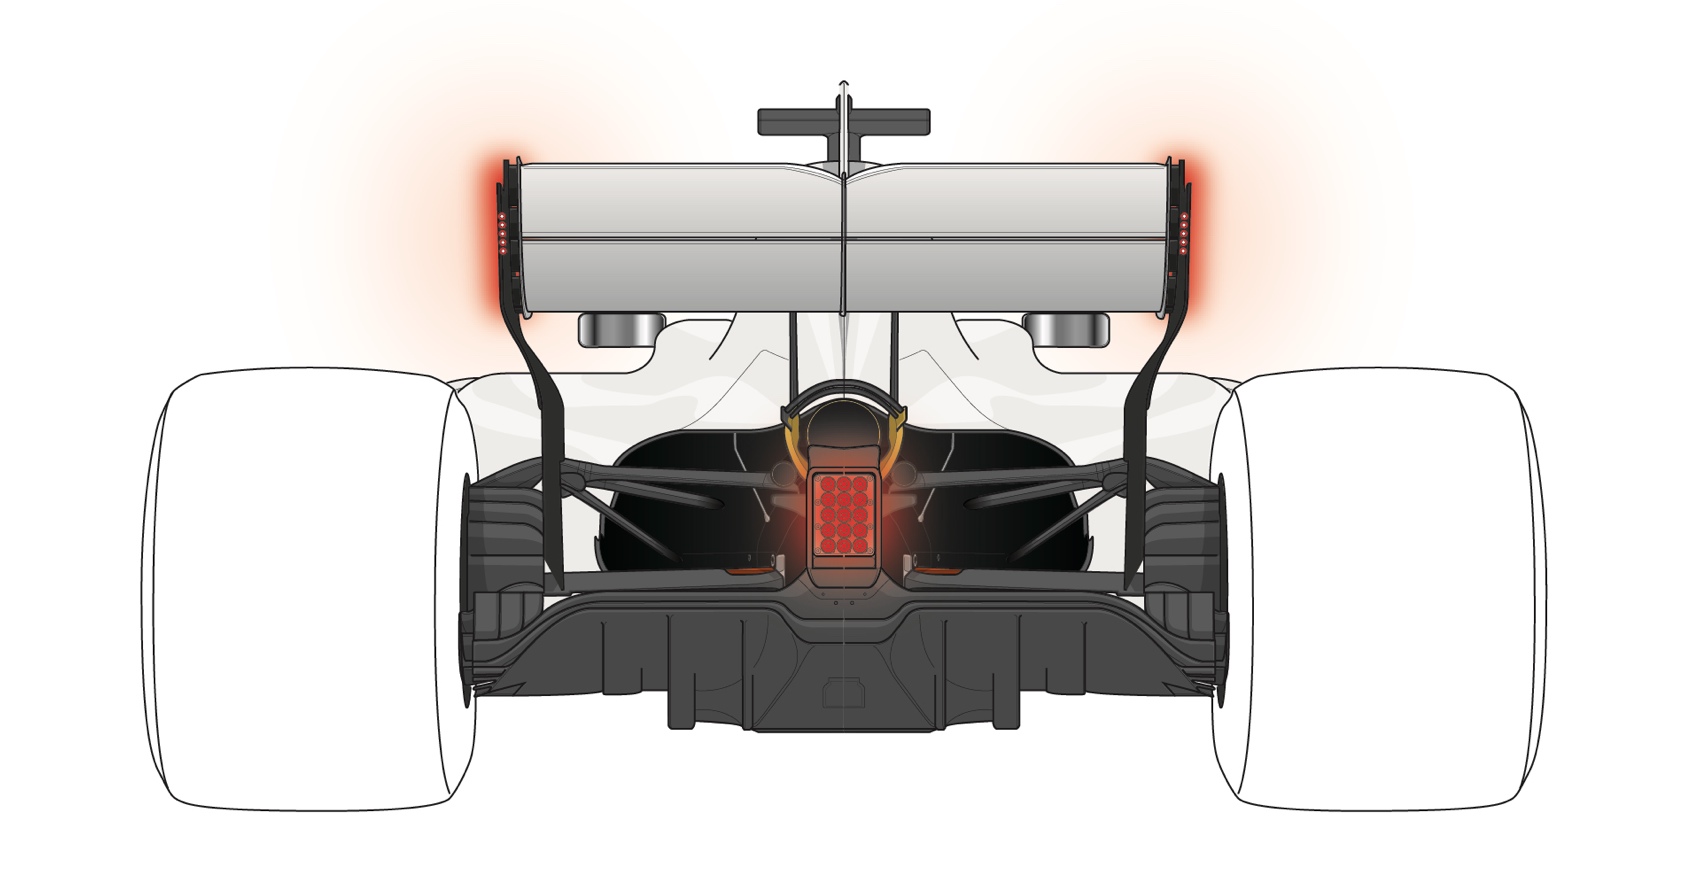 F1 regulations for - Safety - Technology